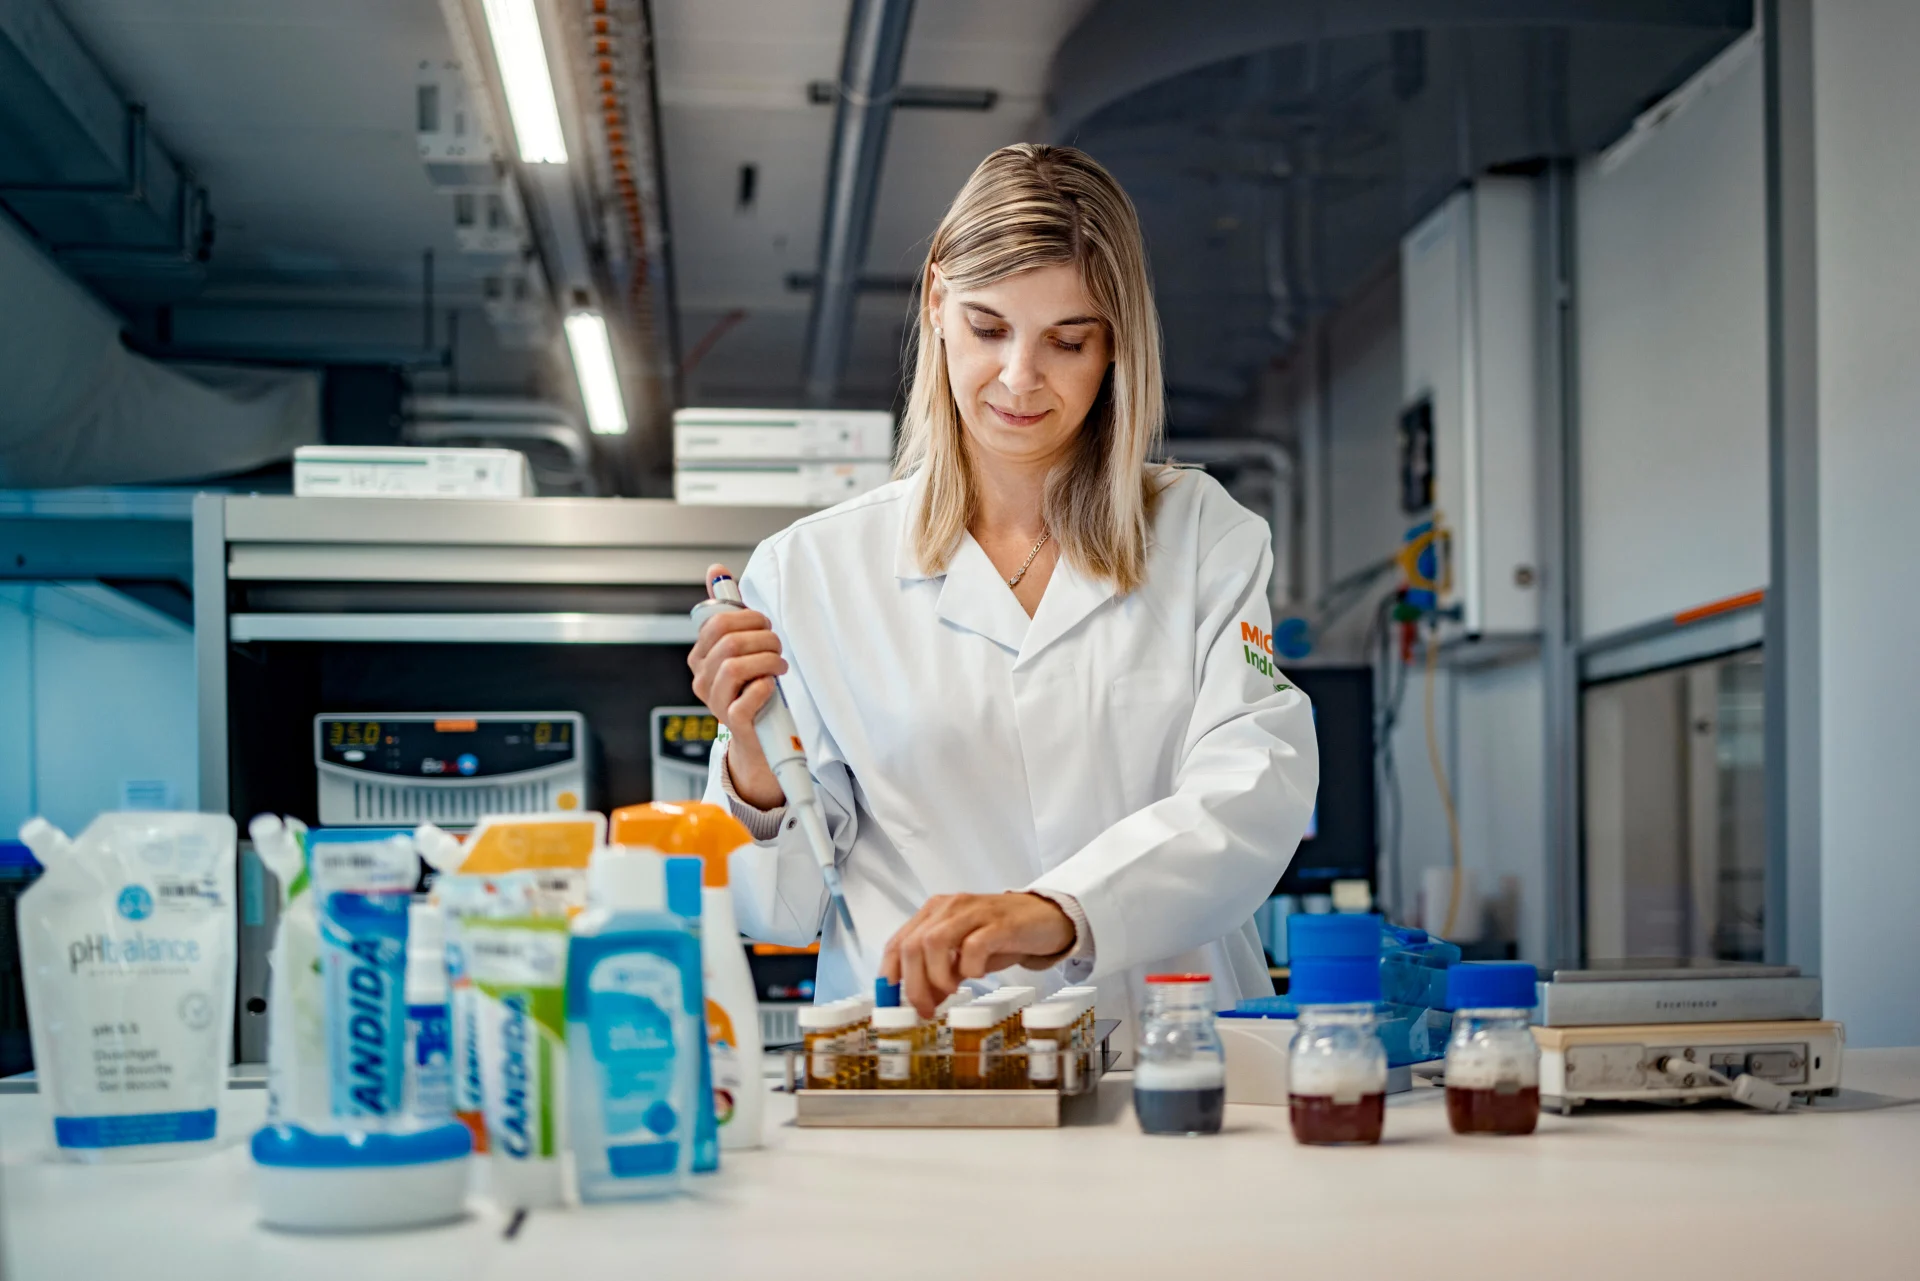 Laboratory employee tests products